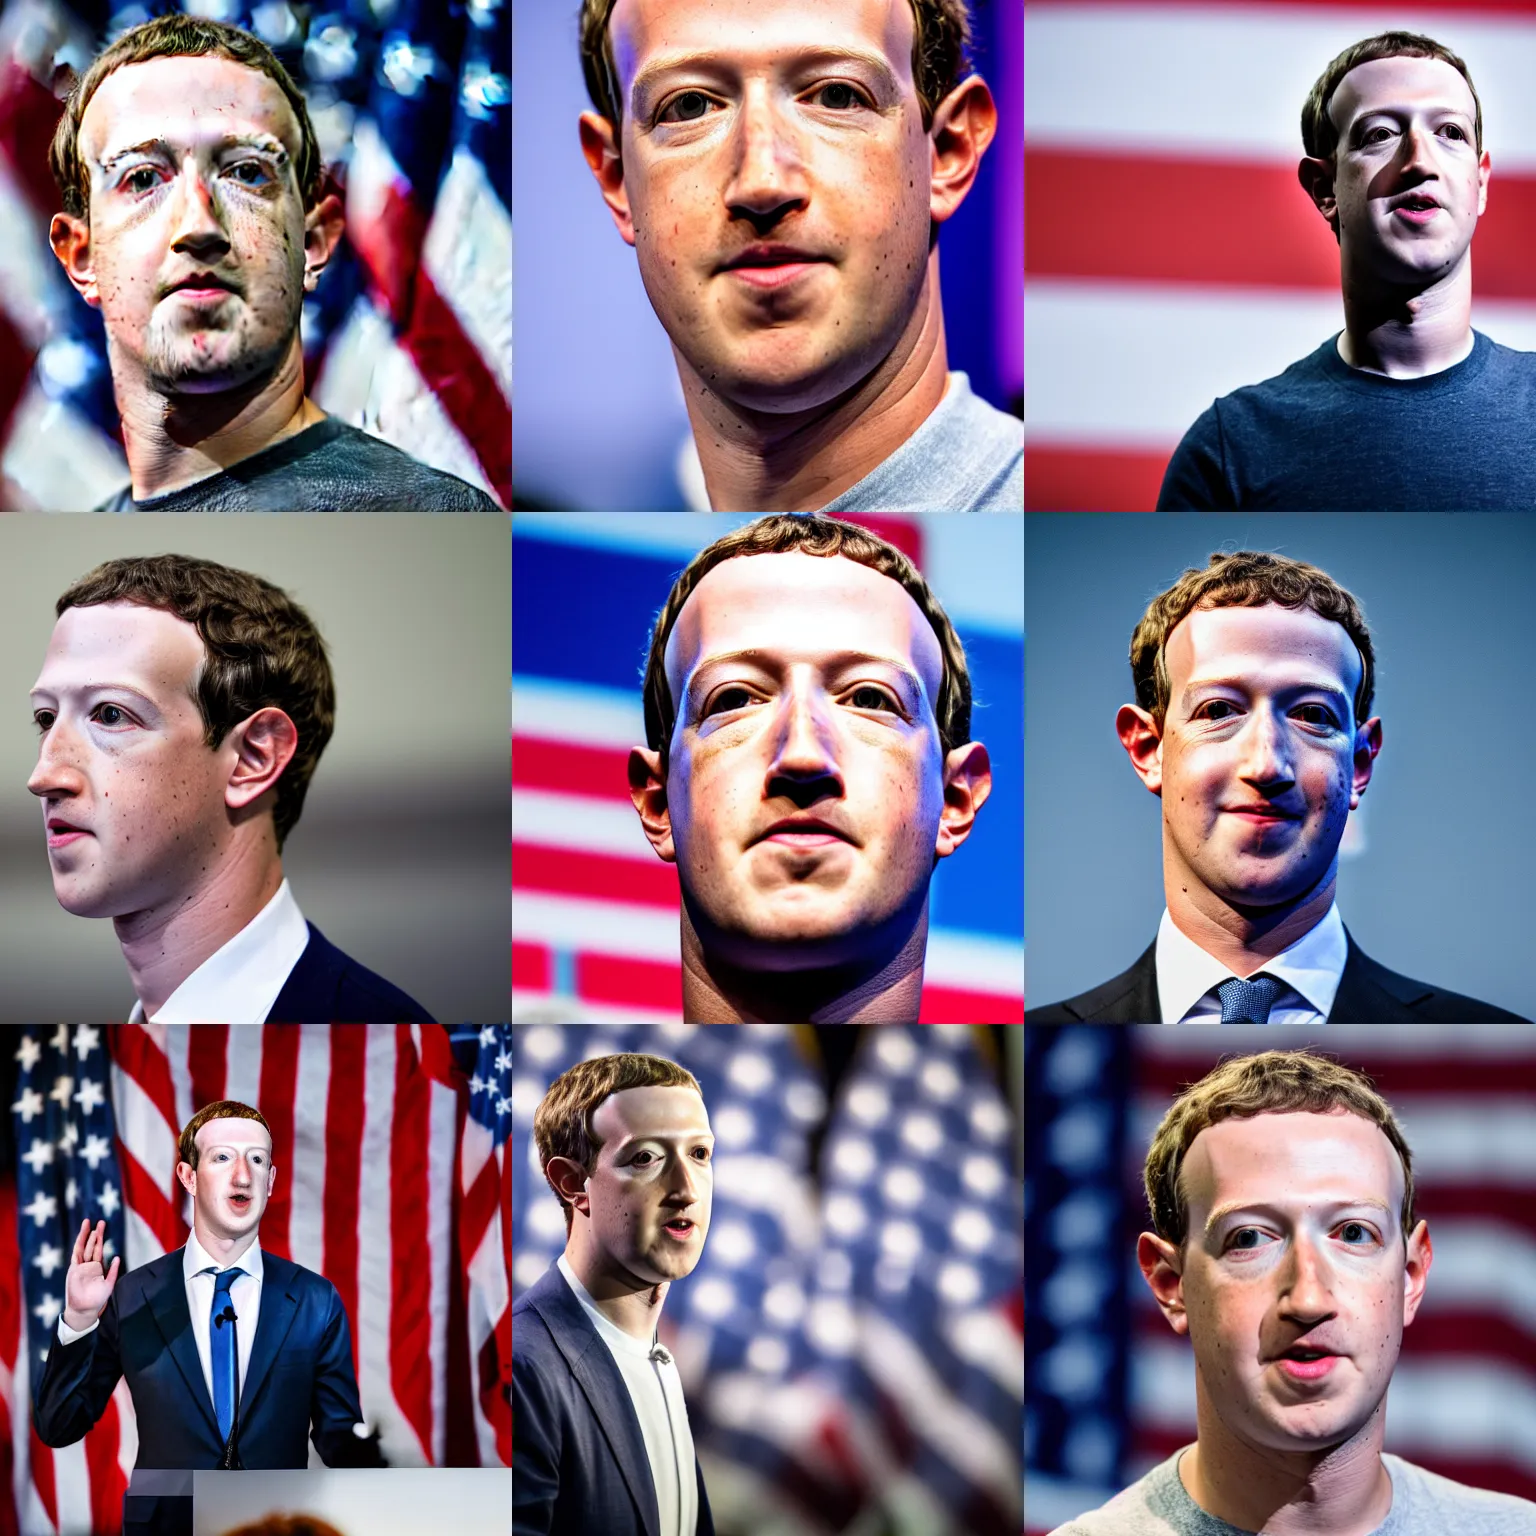 Prompt: headshot of Mark Zuckerberg as the president of the united states at a campaign event, EOS-1D, f/1.4, ISO 200, 1/160s, 8K, RAW, unedited, symmetrical balance, in-frame, Photoshop, Nvidia, Topaz AI